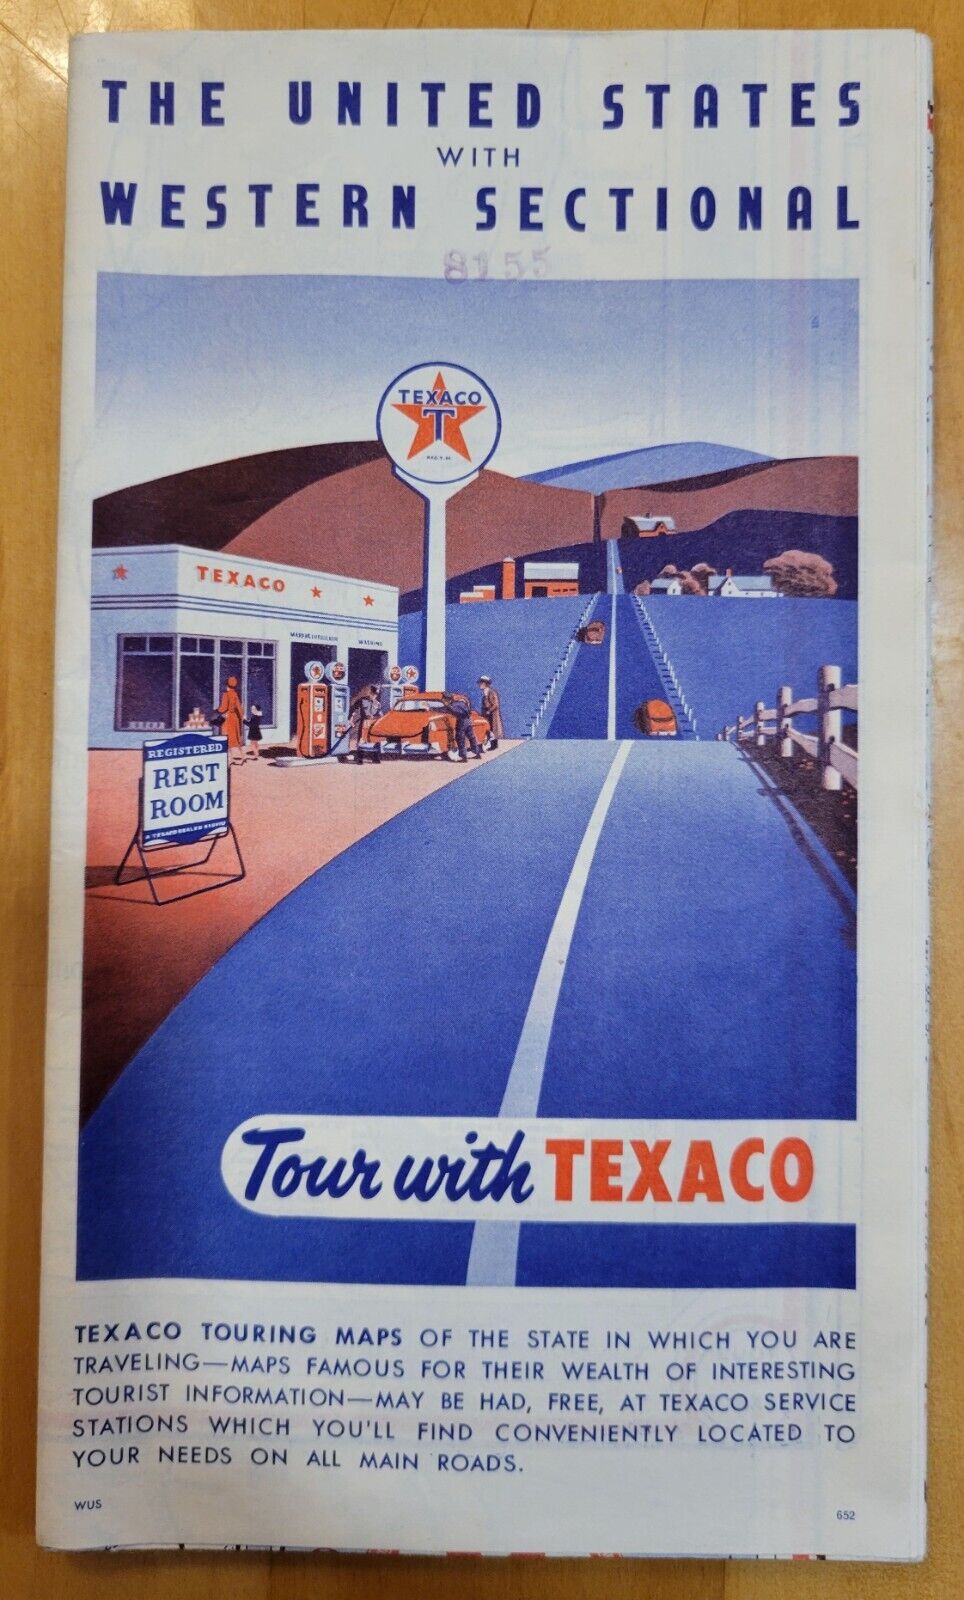 VINTAGE 1952 TEXACO TRIP MAP - THE UNITED STATES with WESTERN SECTIONAL